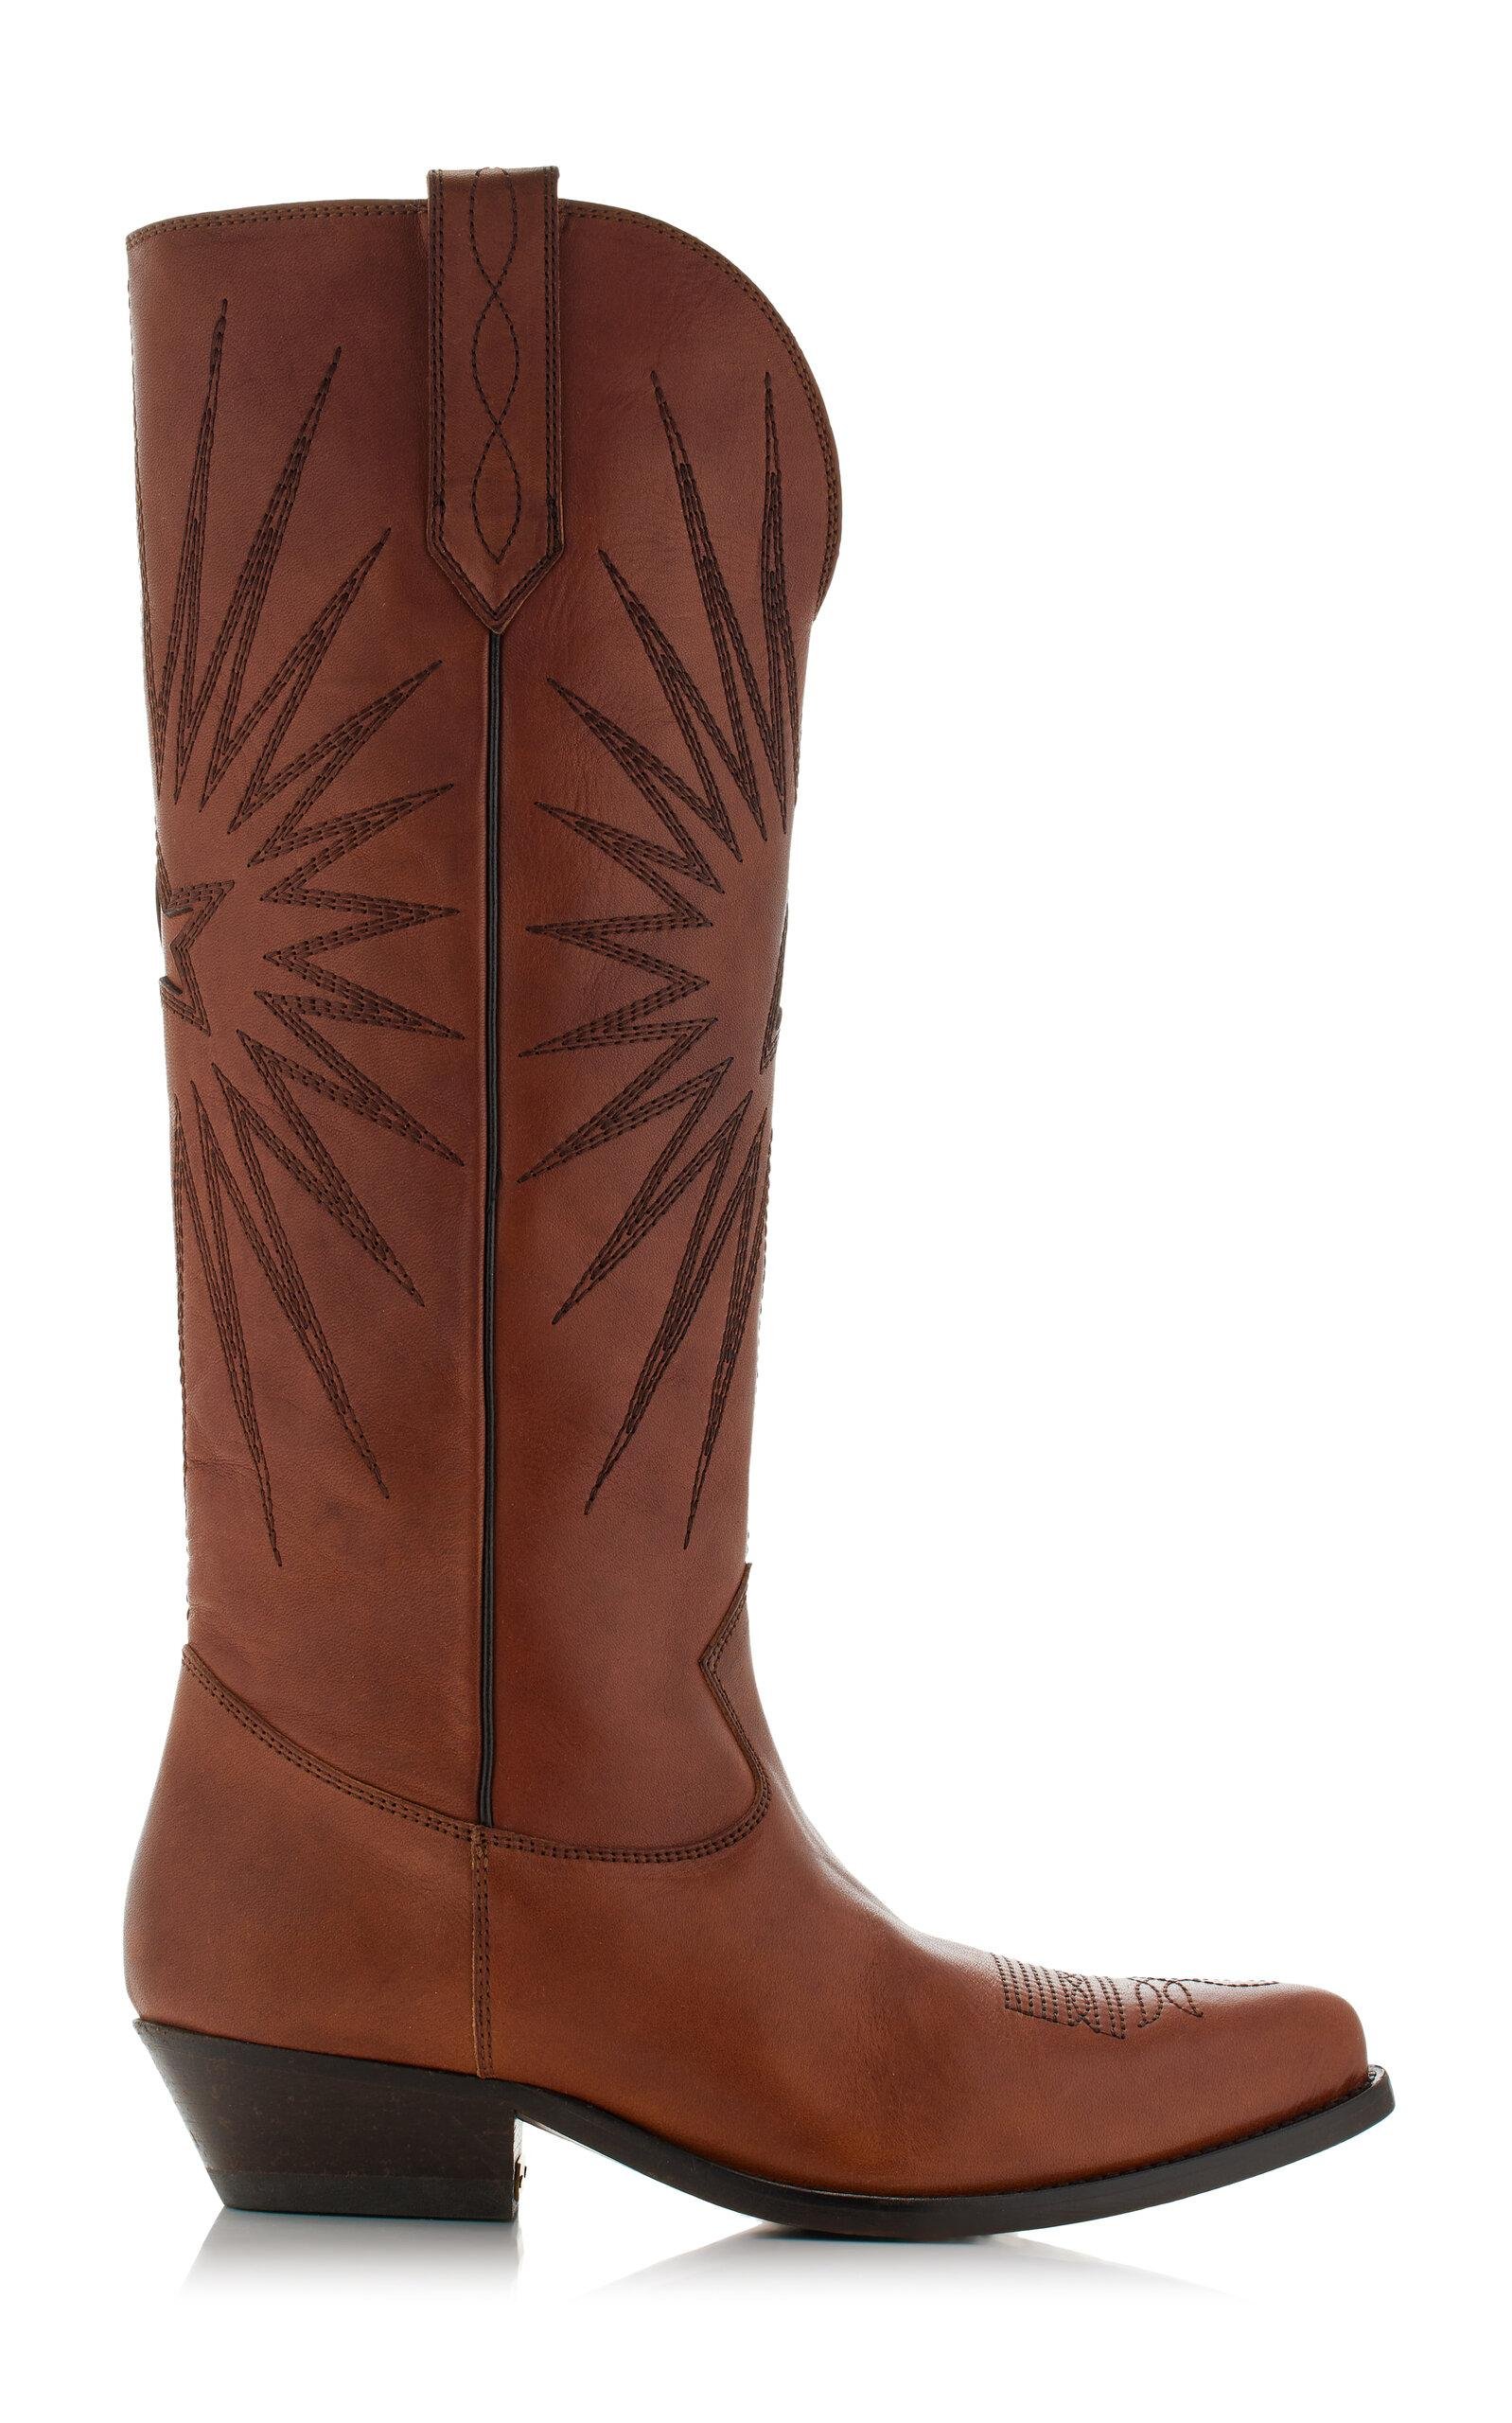 Golden Goose - Wish Star Embroidered Leather Western Boots - Brown - IT 37 - Moda Operandi by GOLDEN GOOSE